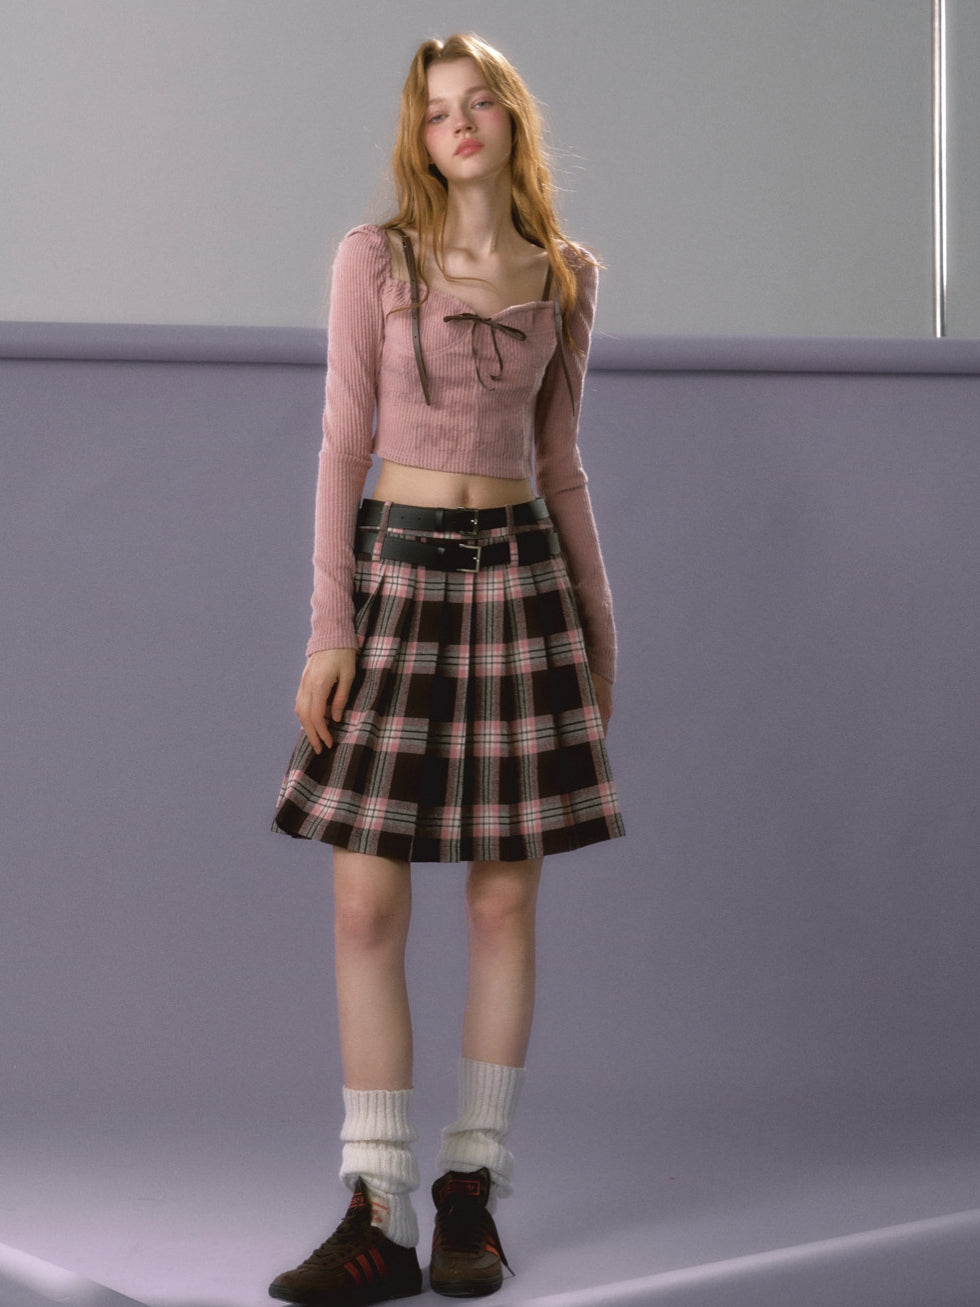 Checked Pleats Girly Flare Casual College Mini-Skirt